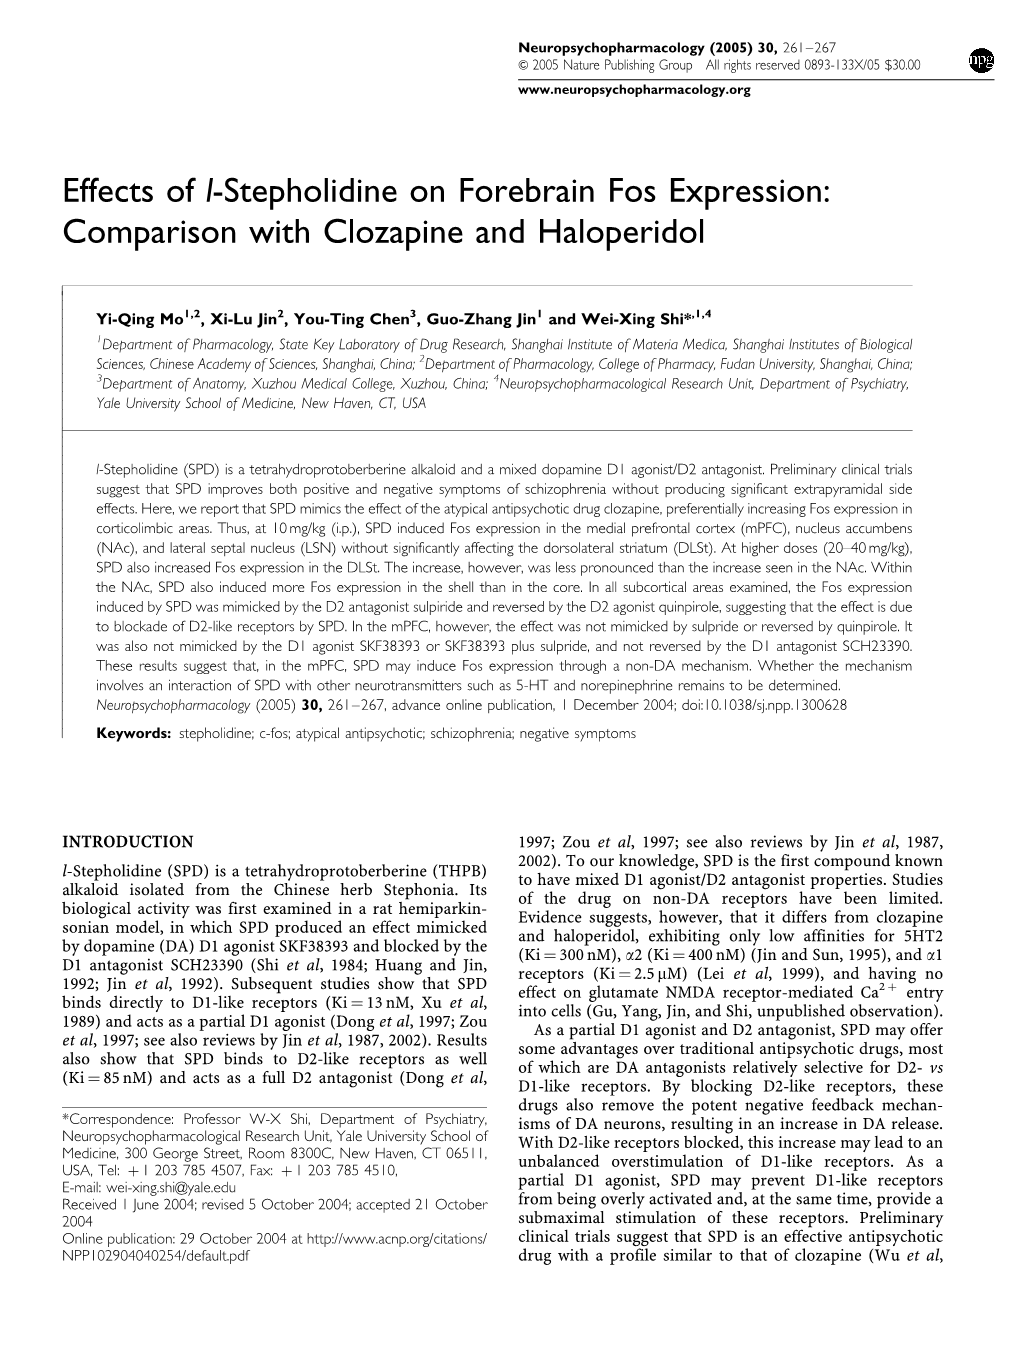 Effects of L-Stepholidine on Forebrain Fos Expression: Comparison with Clozapine and Haloperidol